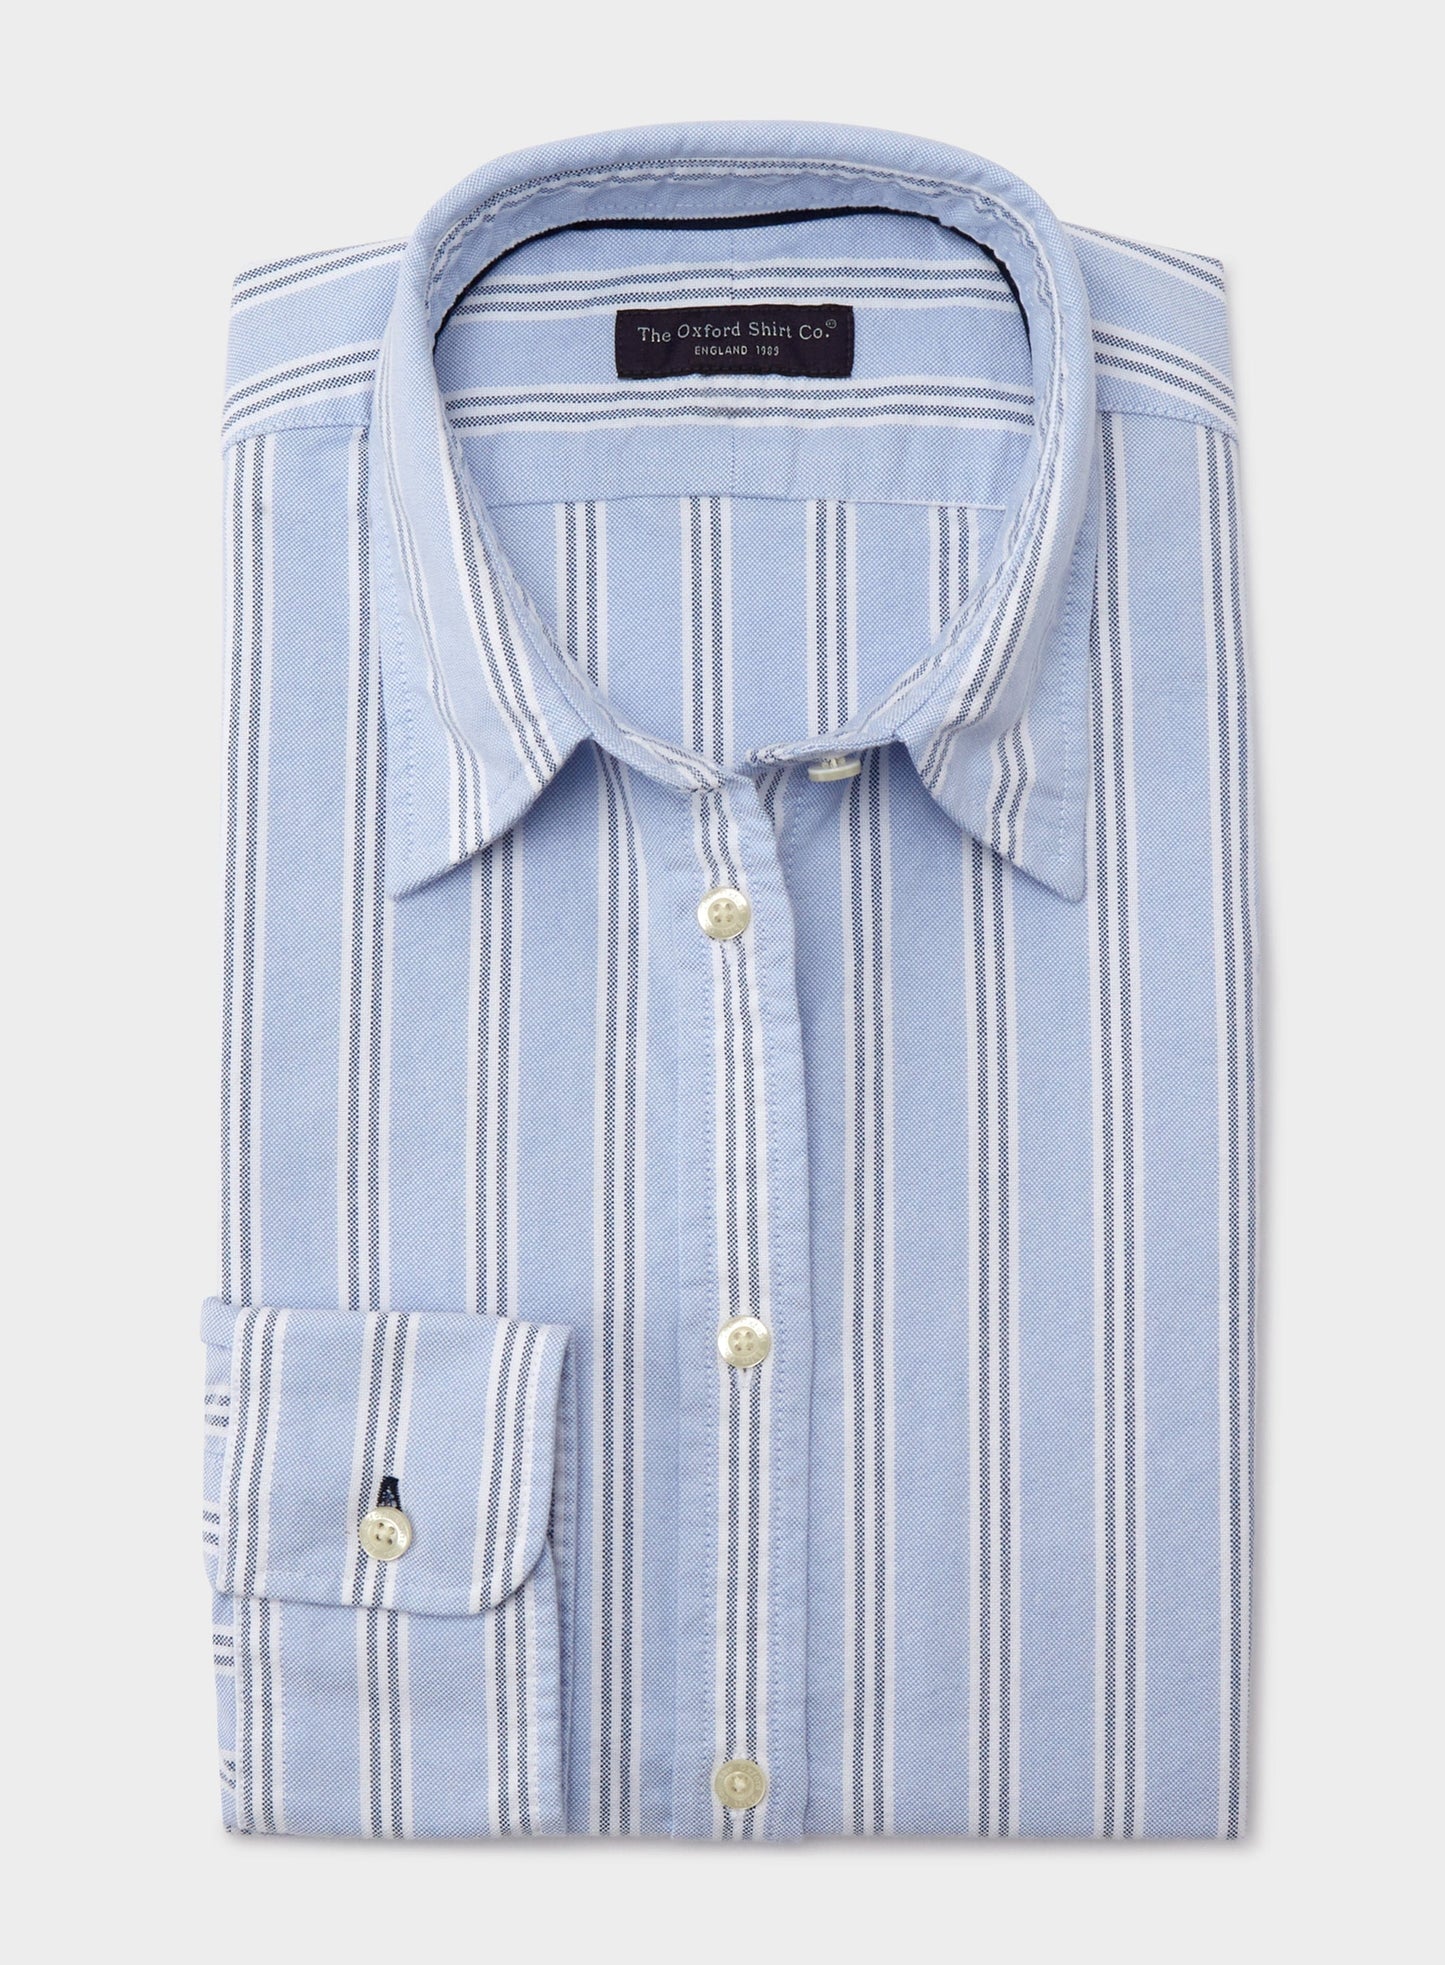 Classic Oxford Shirt - Blue and Navy Stripe